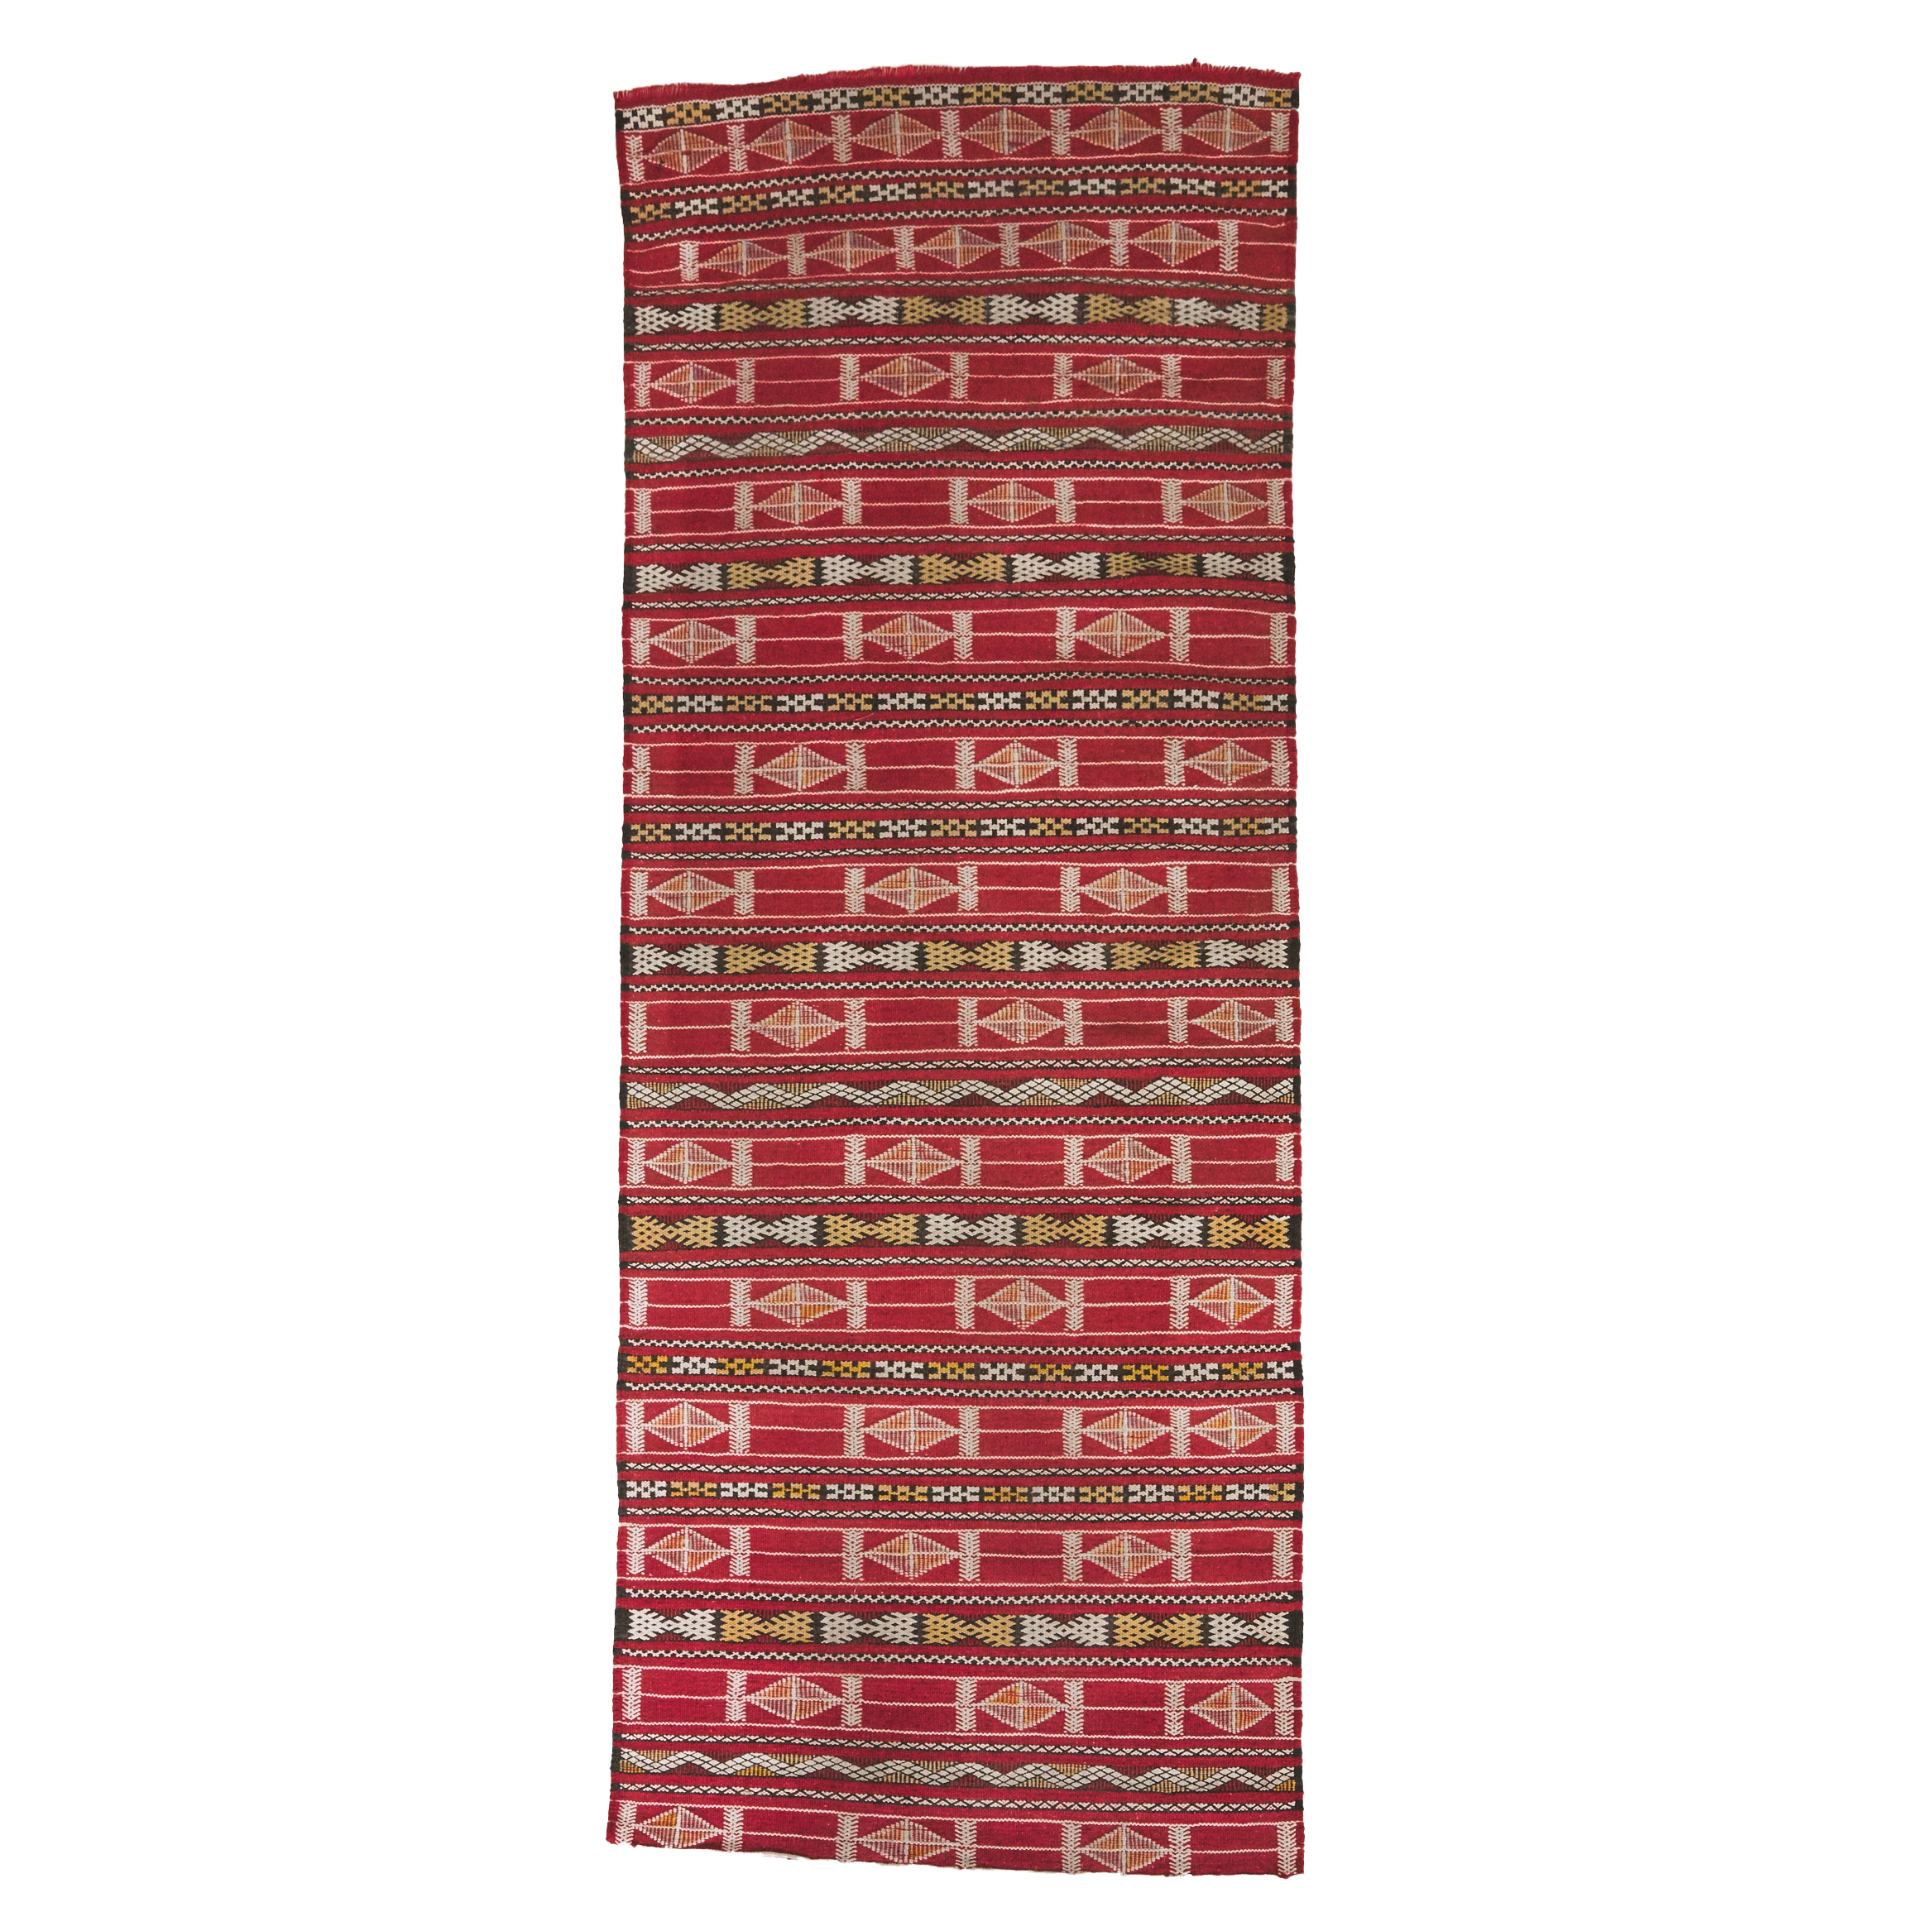 Moroccan Flat Weave Runner, North Africa, c.1970/80